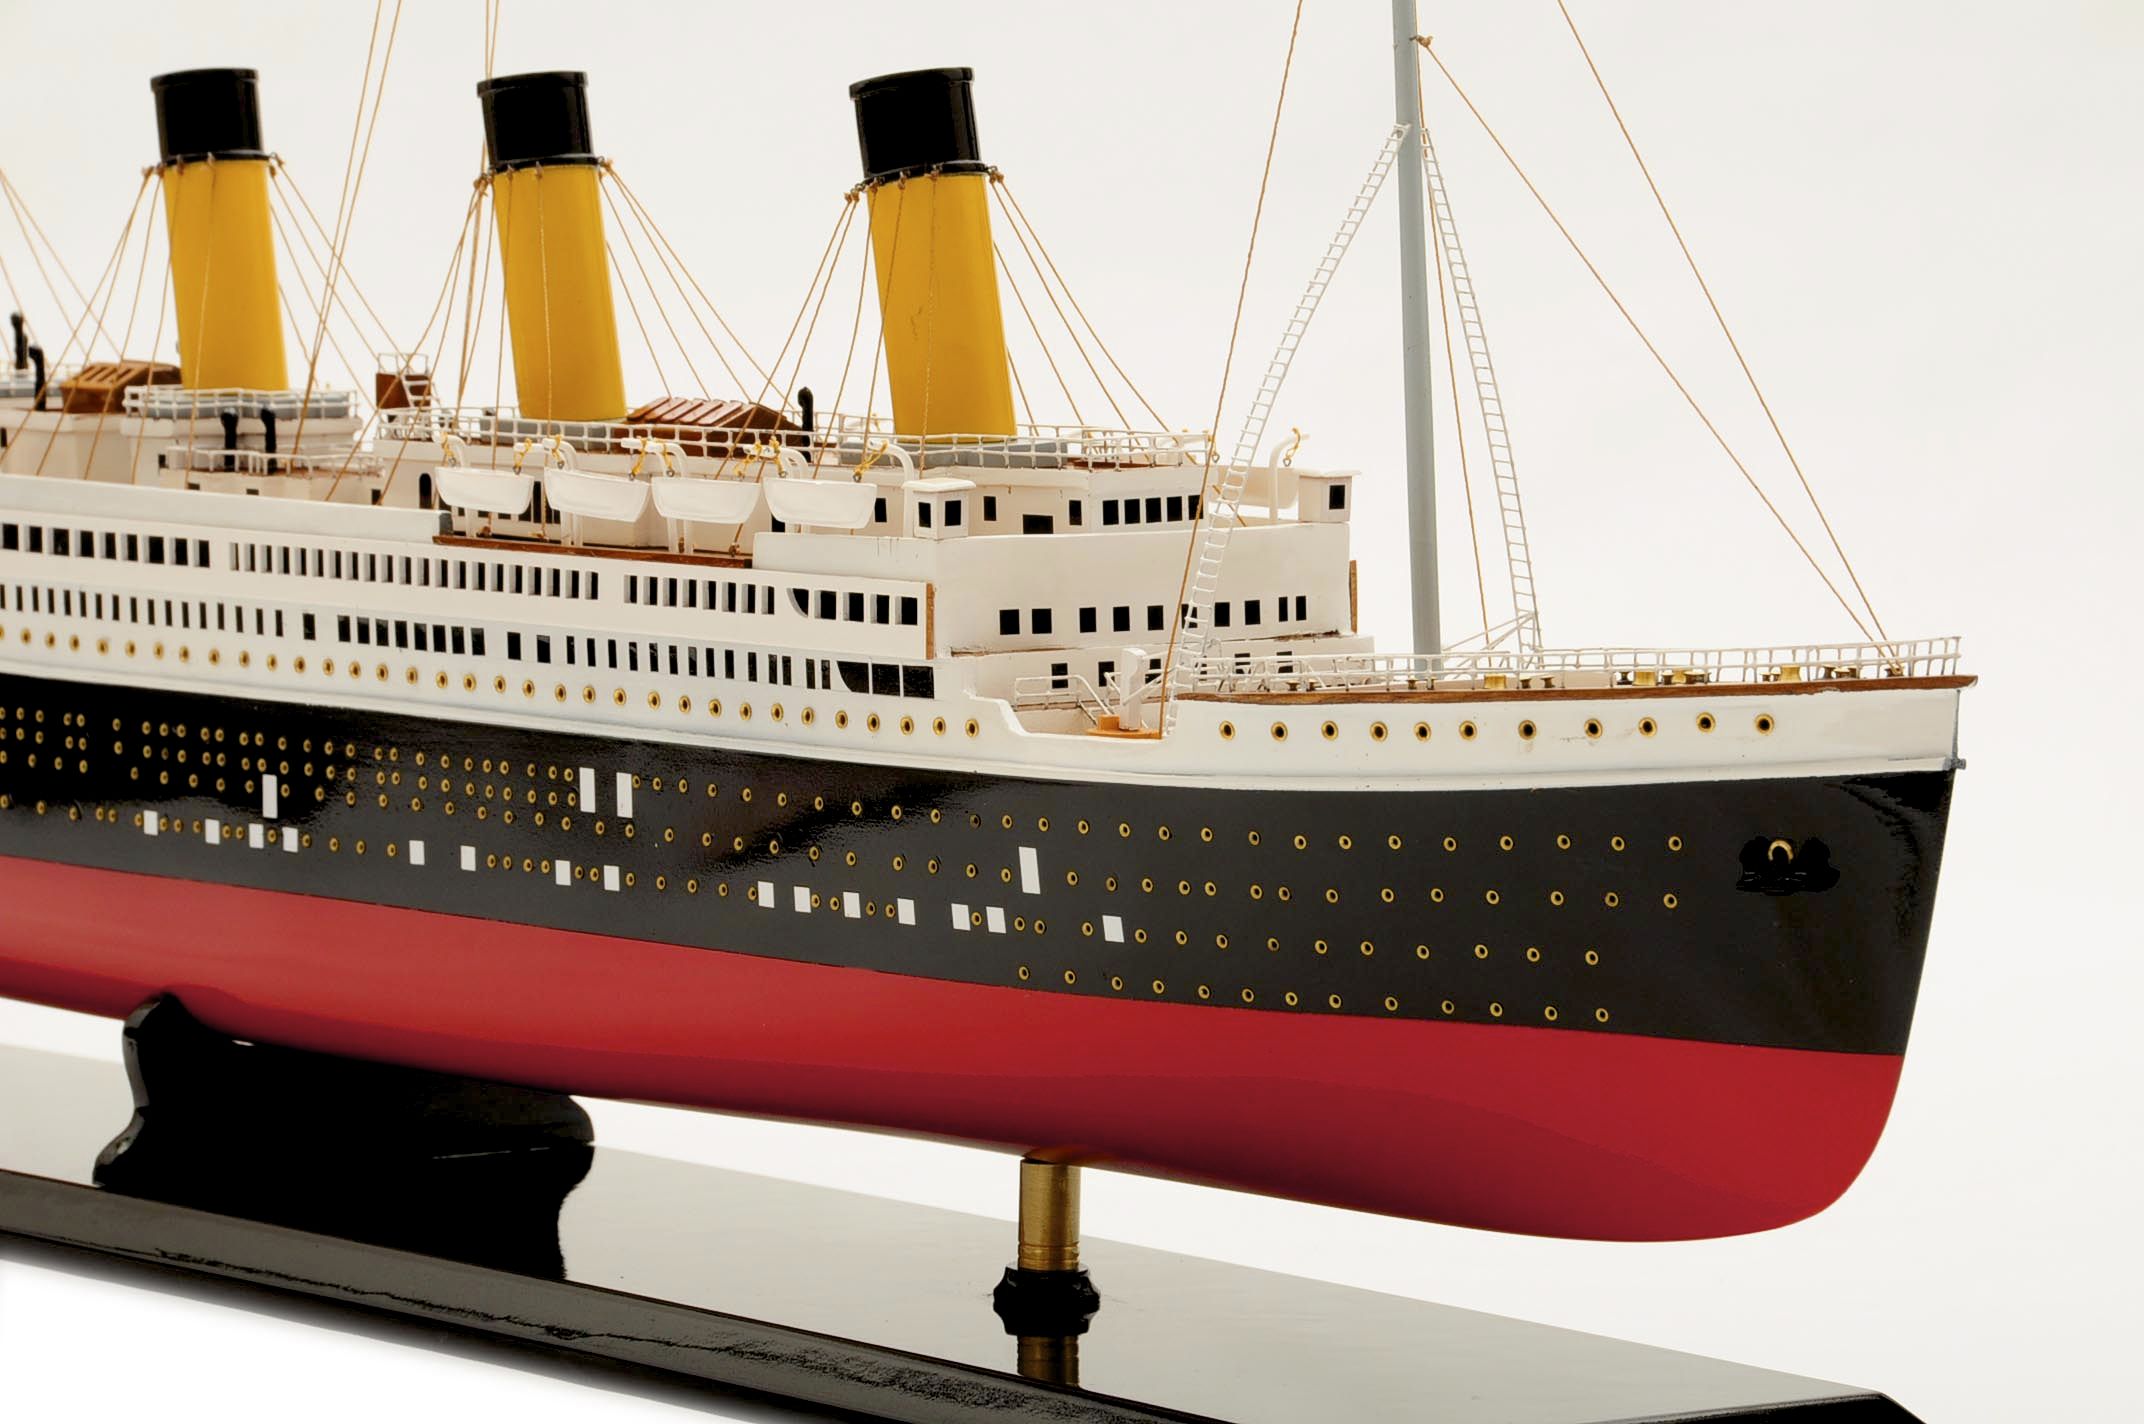 Rms Titanic Lifeboat Model Ship Model Handcrafted Wooden Replica With ...